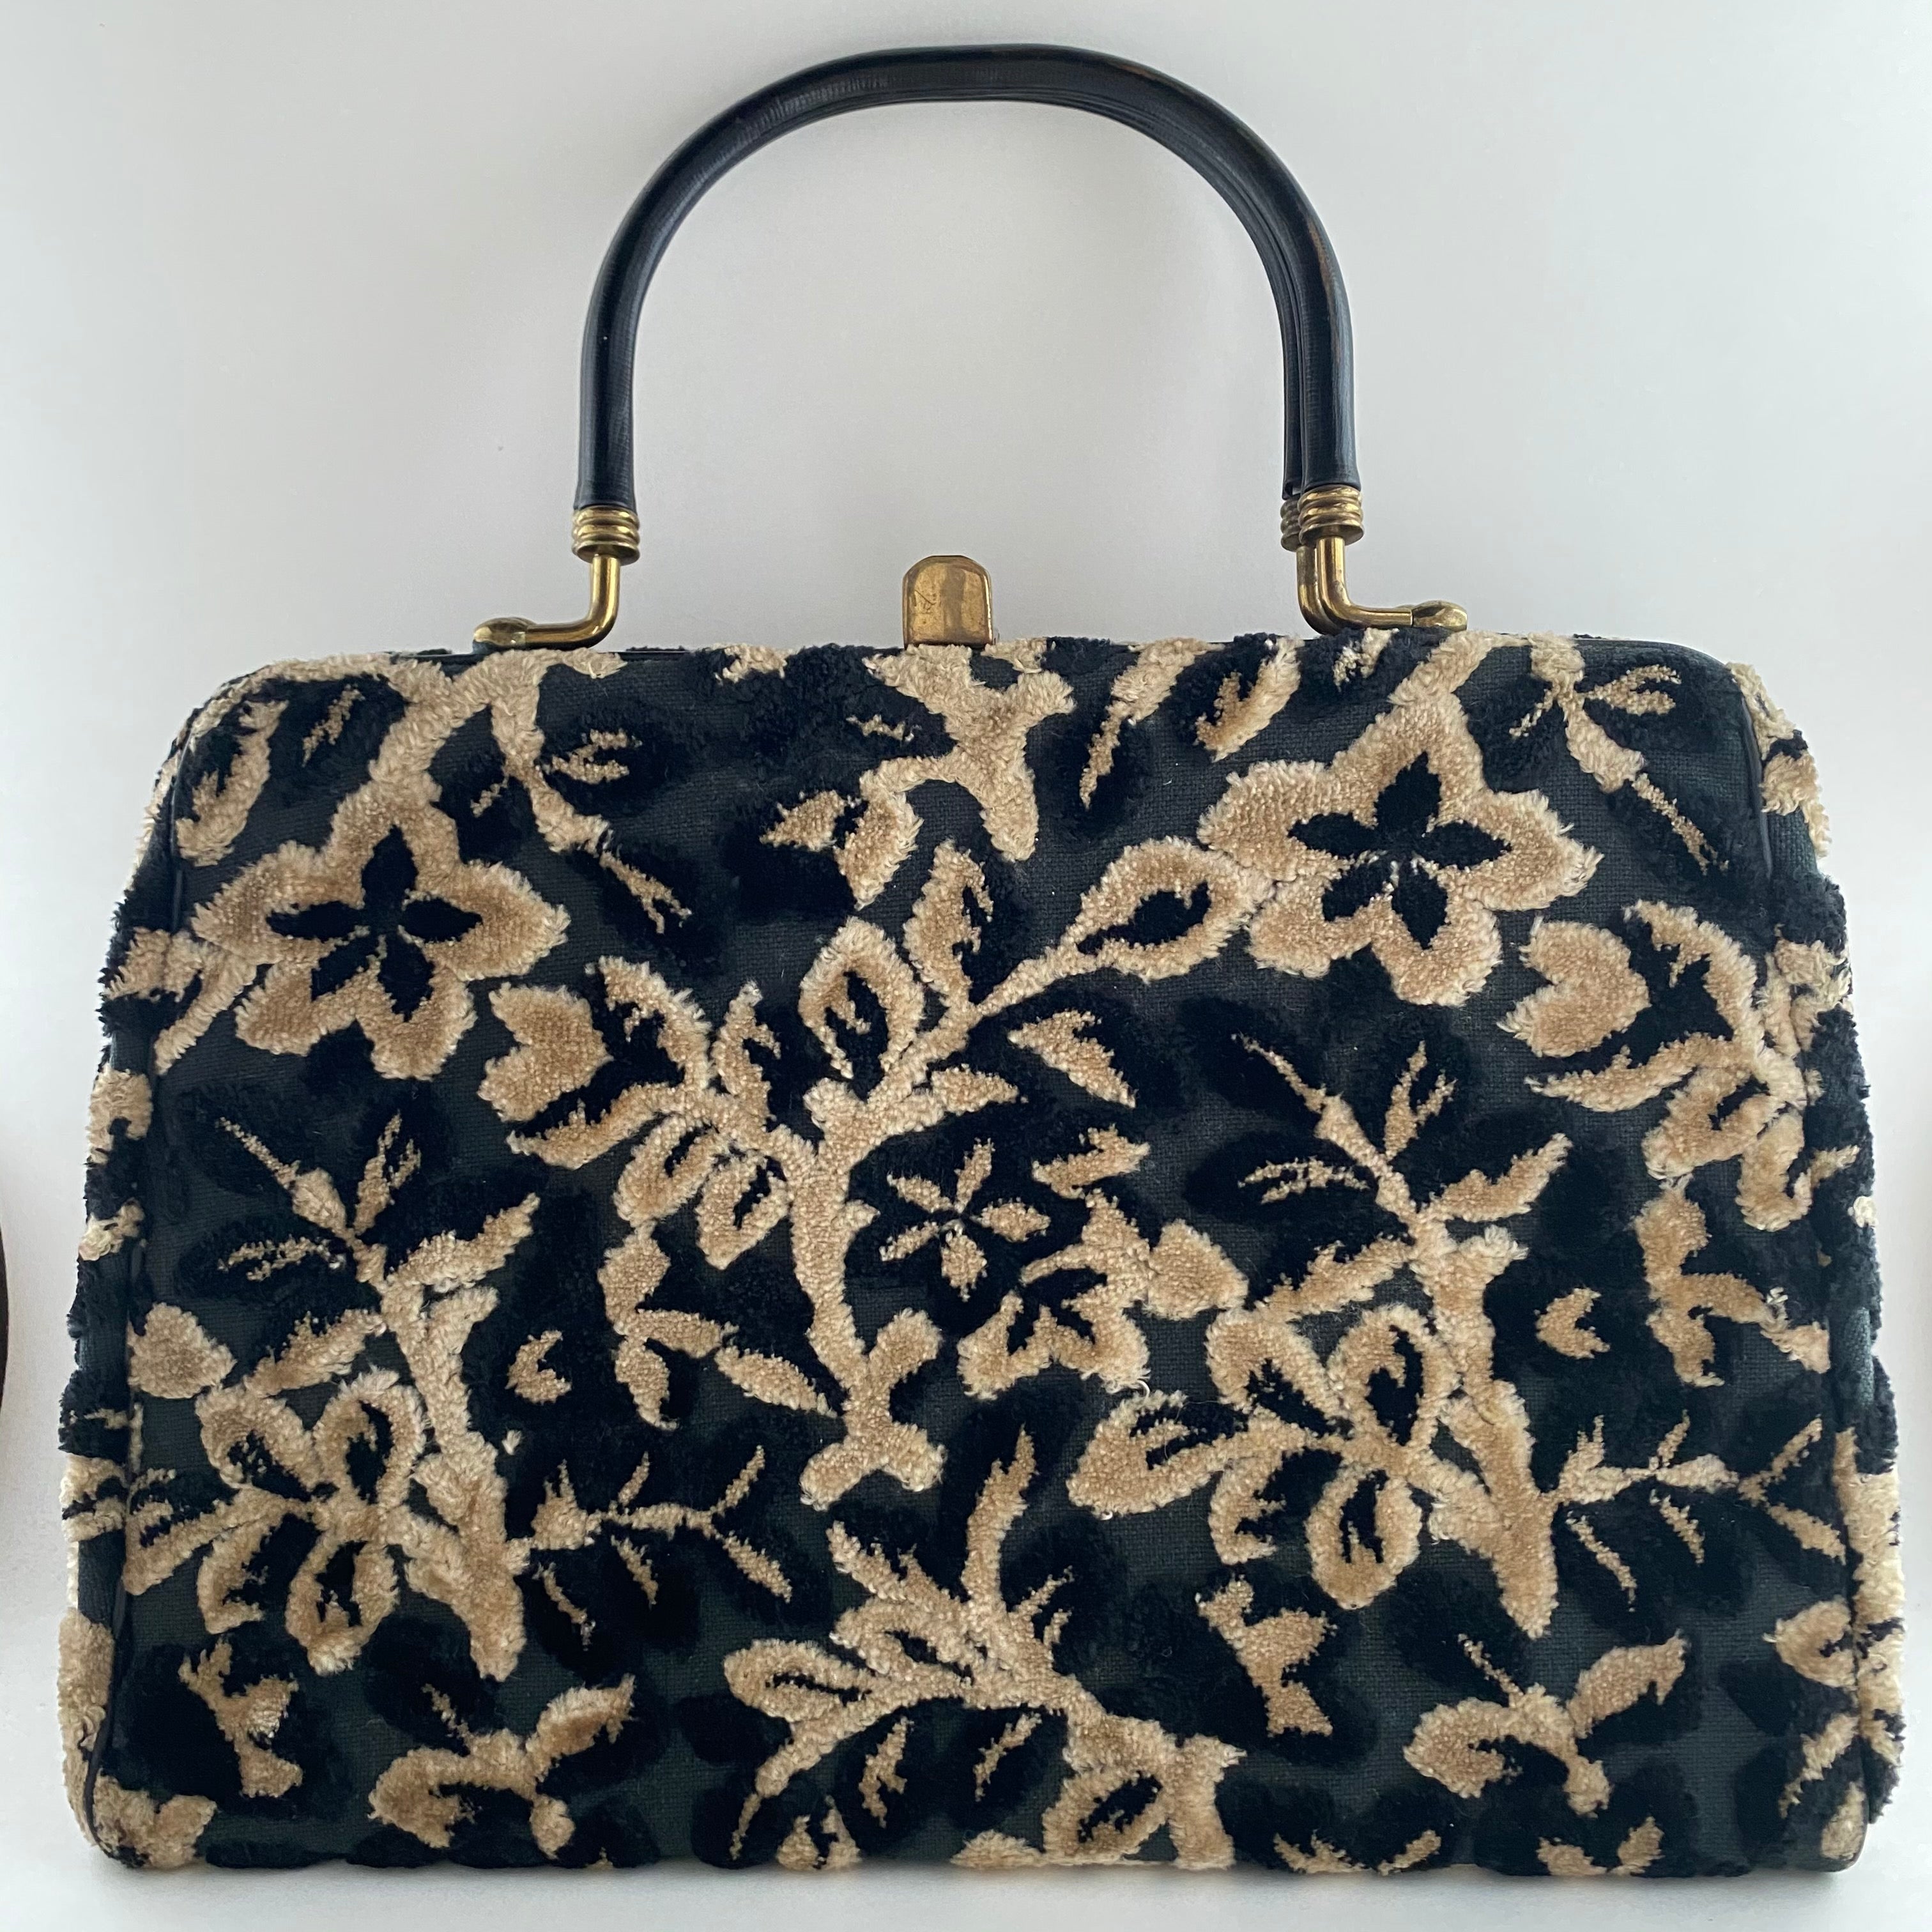 Shop for Trendy Tapestry Bags at Henney Bear